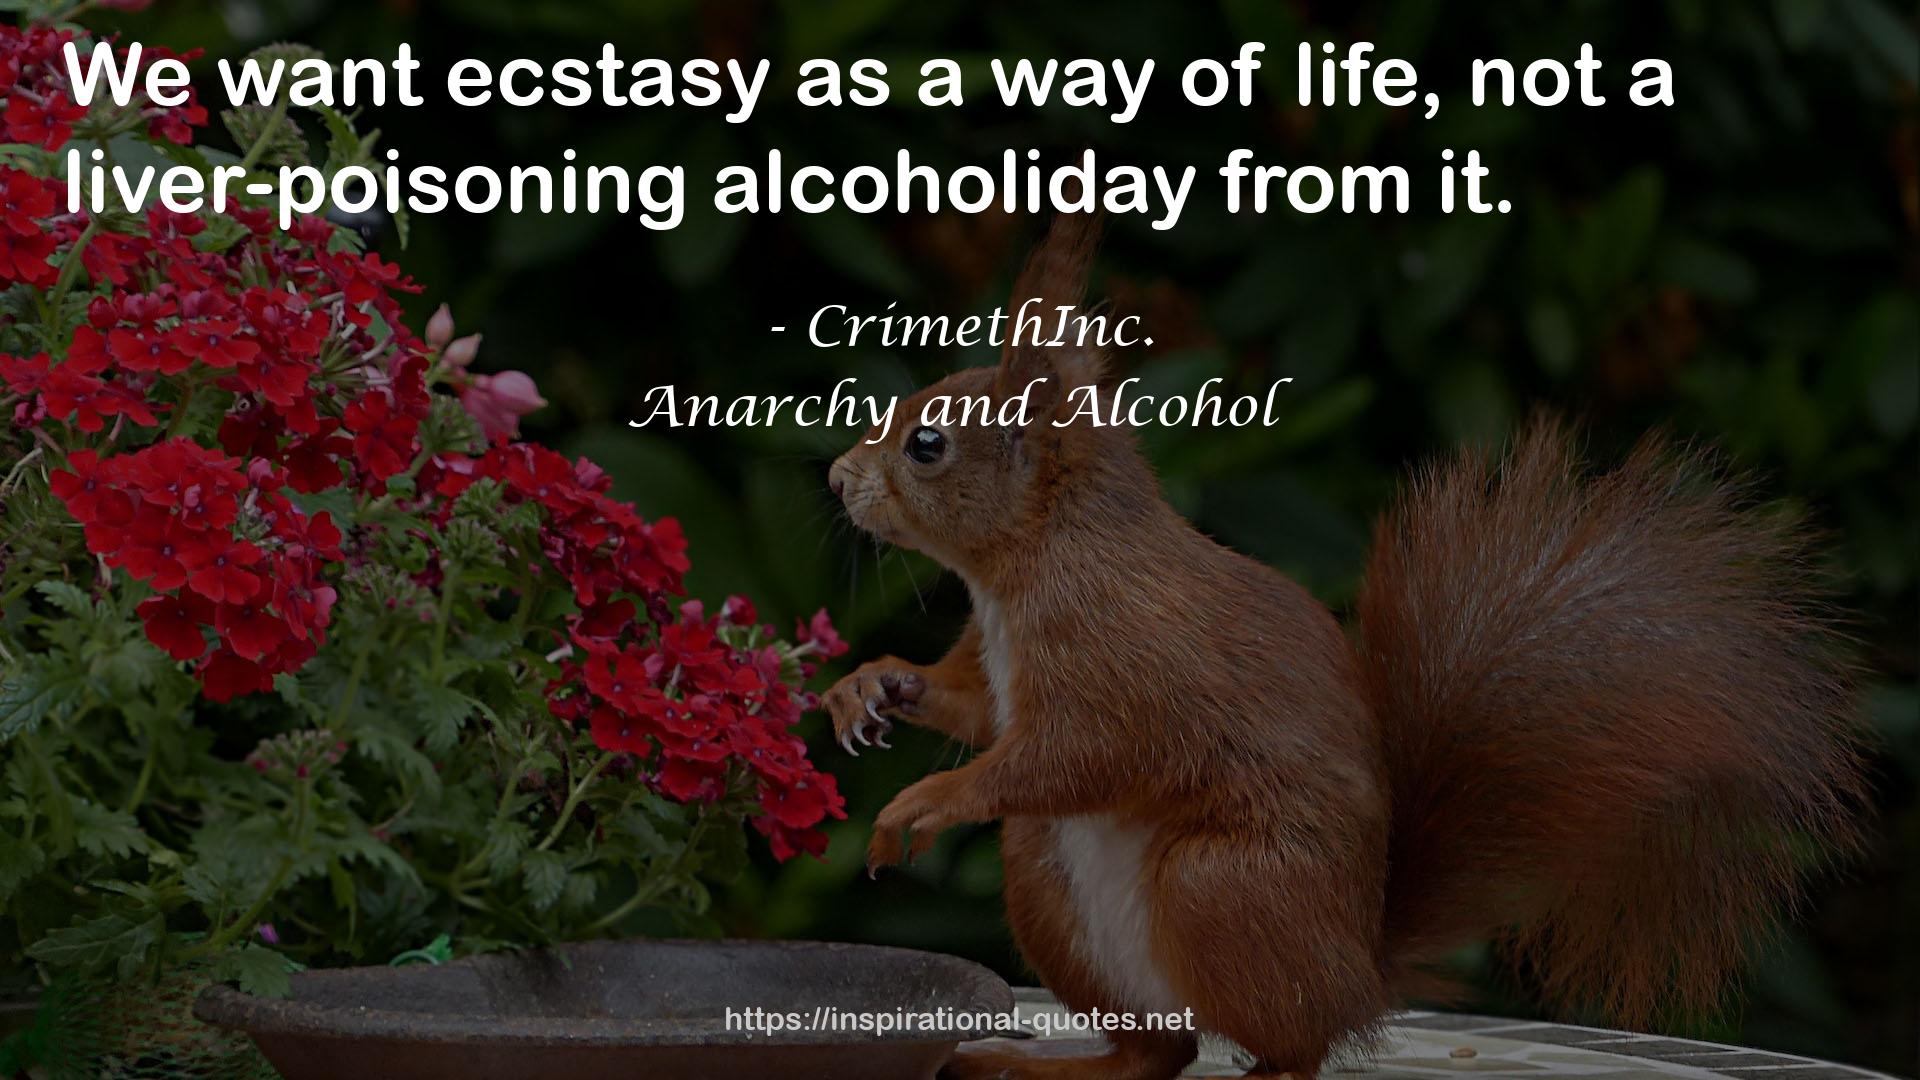 a liver-poisoning alcoholiday  QUOTES